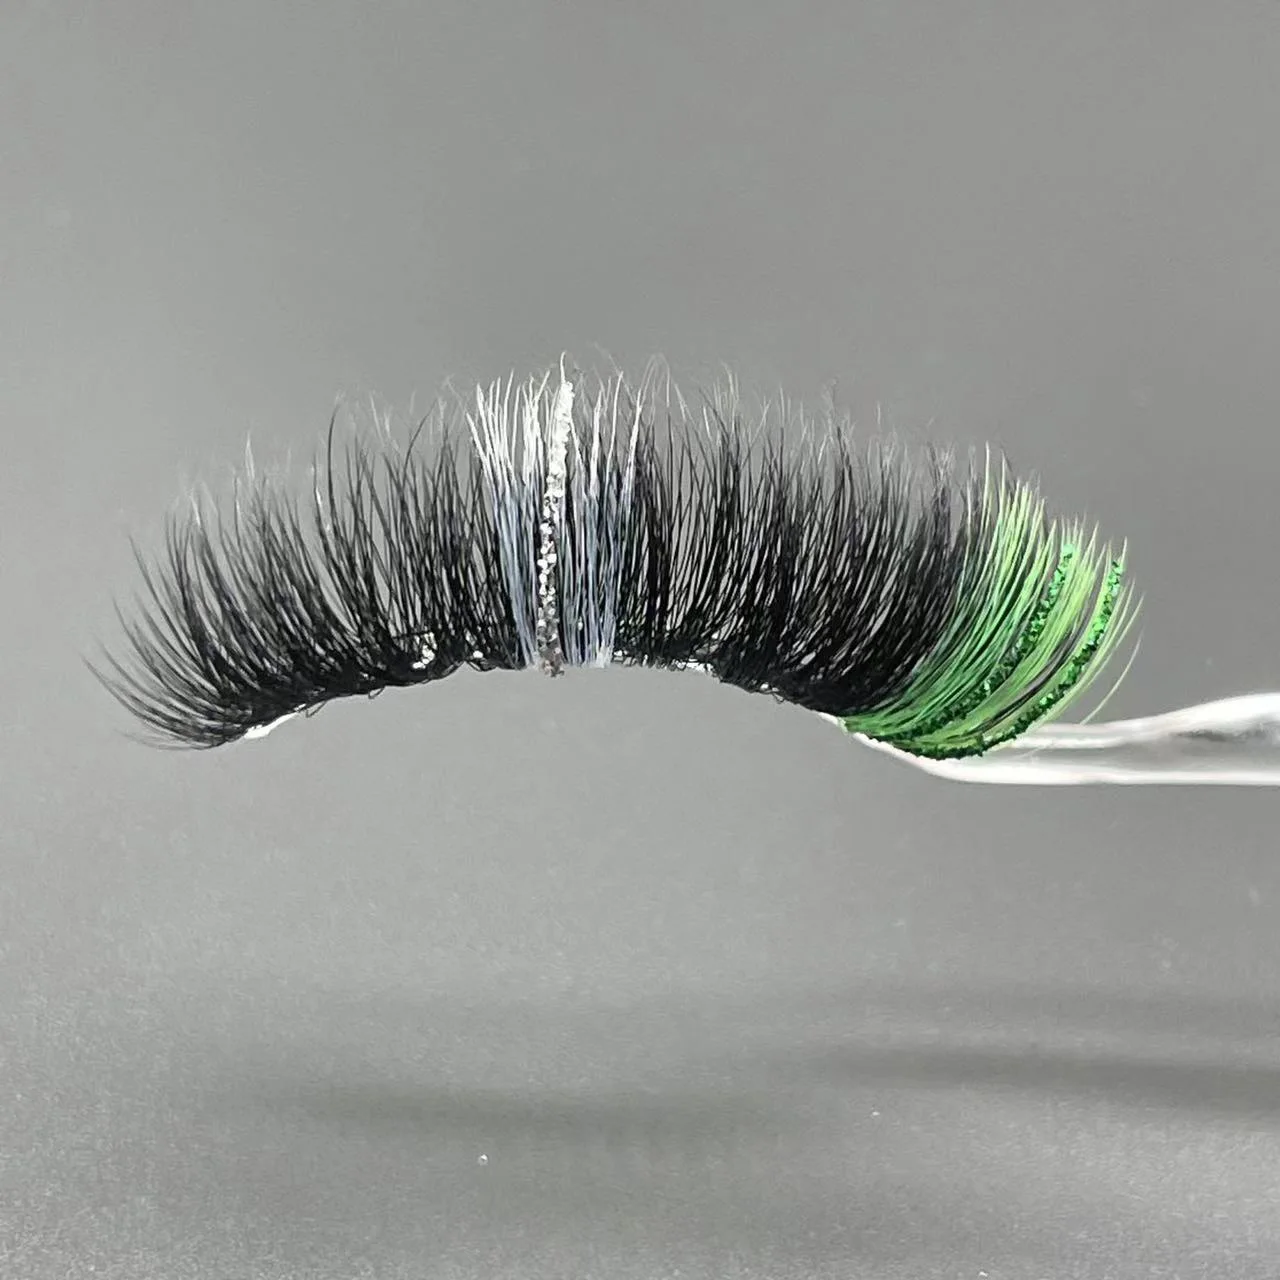 Hbzgtlad Colored Lashes Glitter Mink 15mm -20mm Fluffy Color Streaks Cosplay Makeup Beauty Eyelashes -Outlet Maid Outfit Store S9c297643d7f744eca8391f7070dc8b49j.jpg